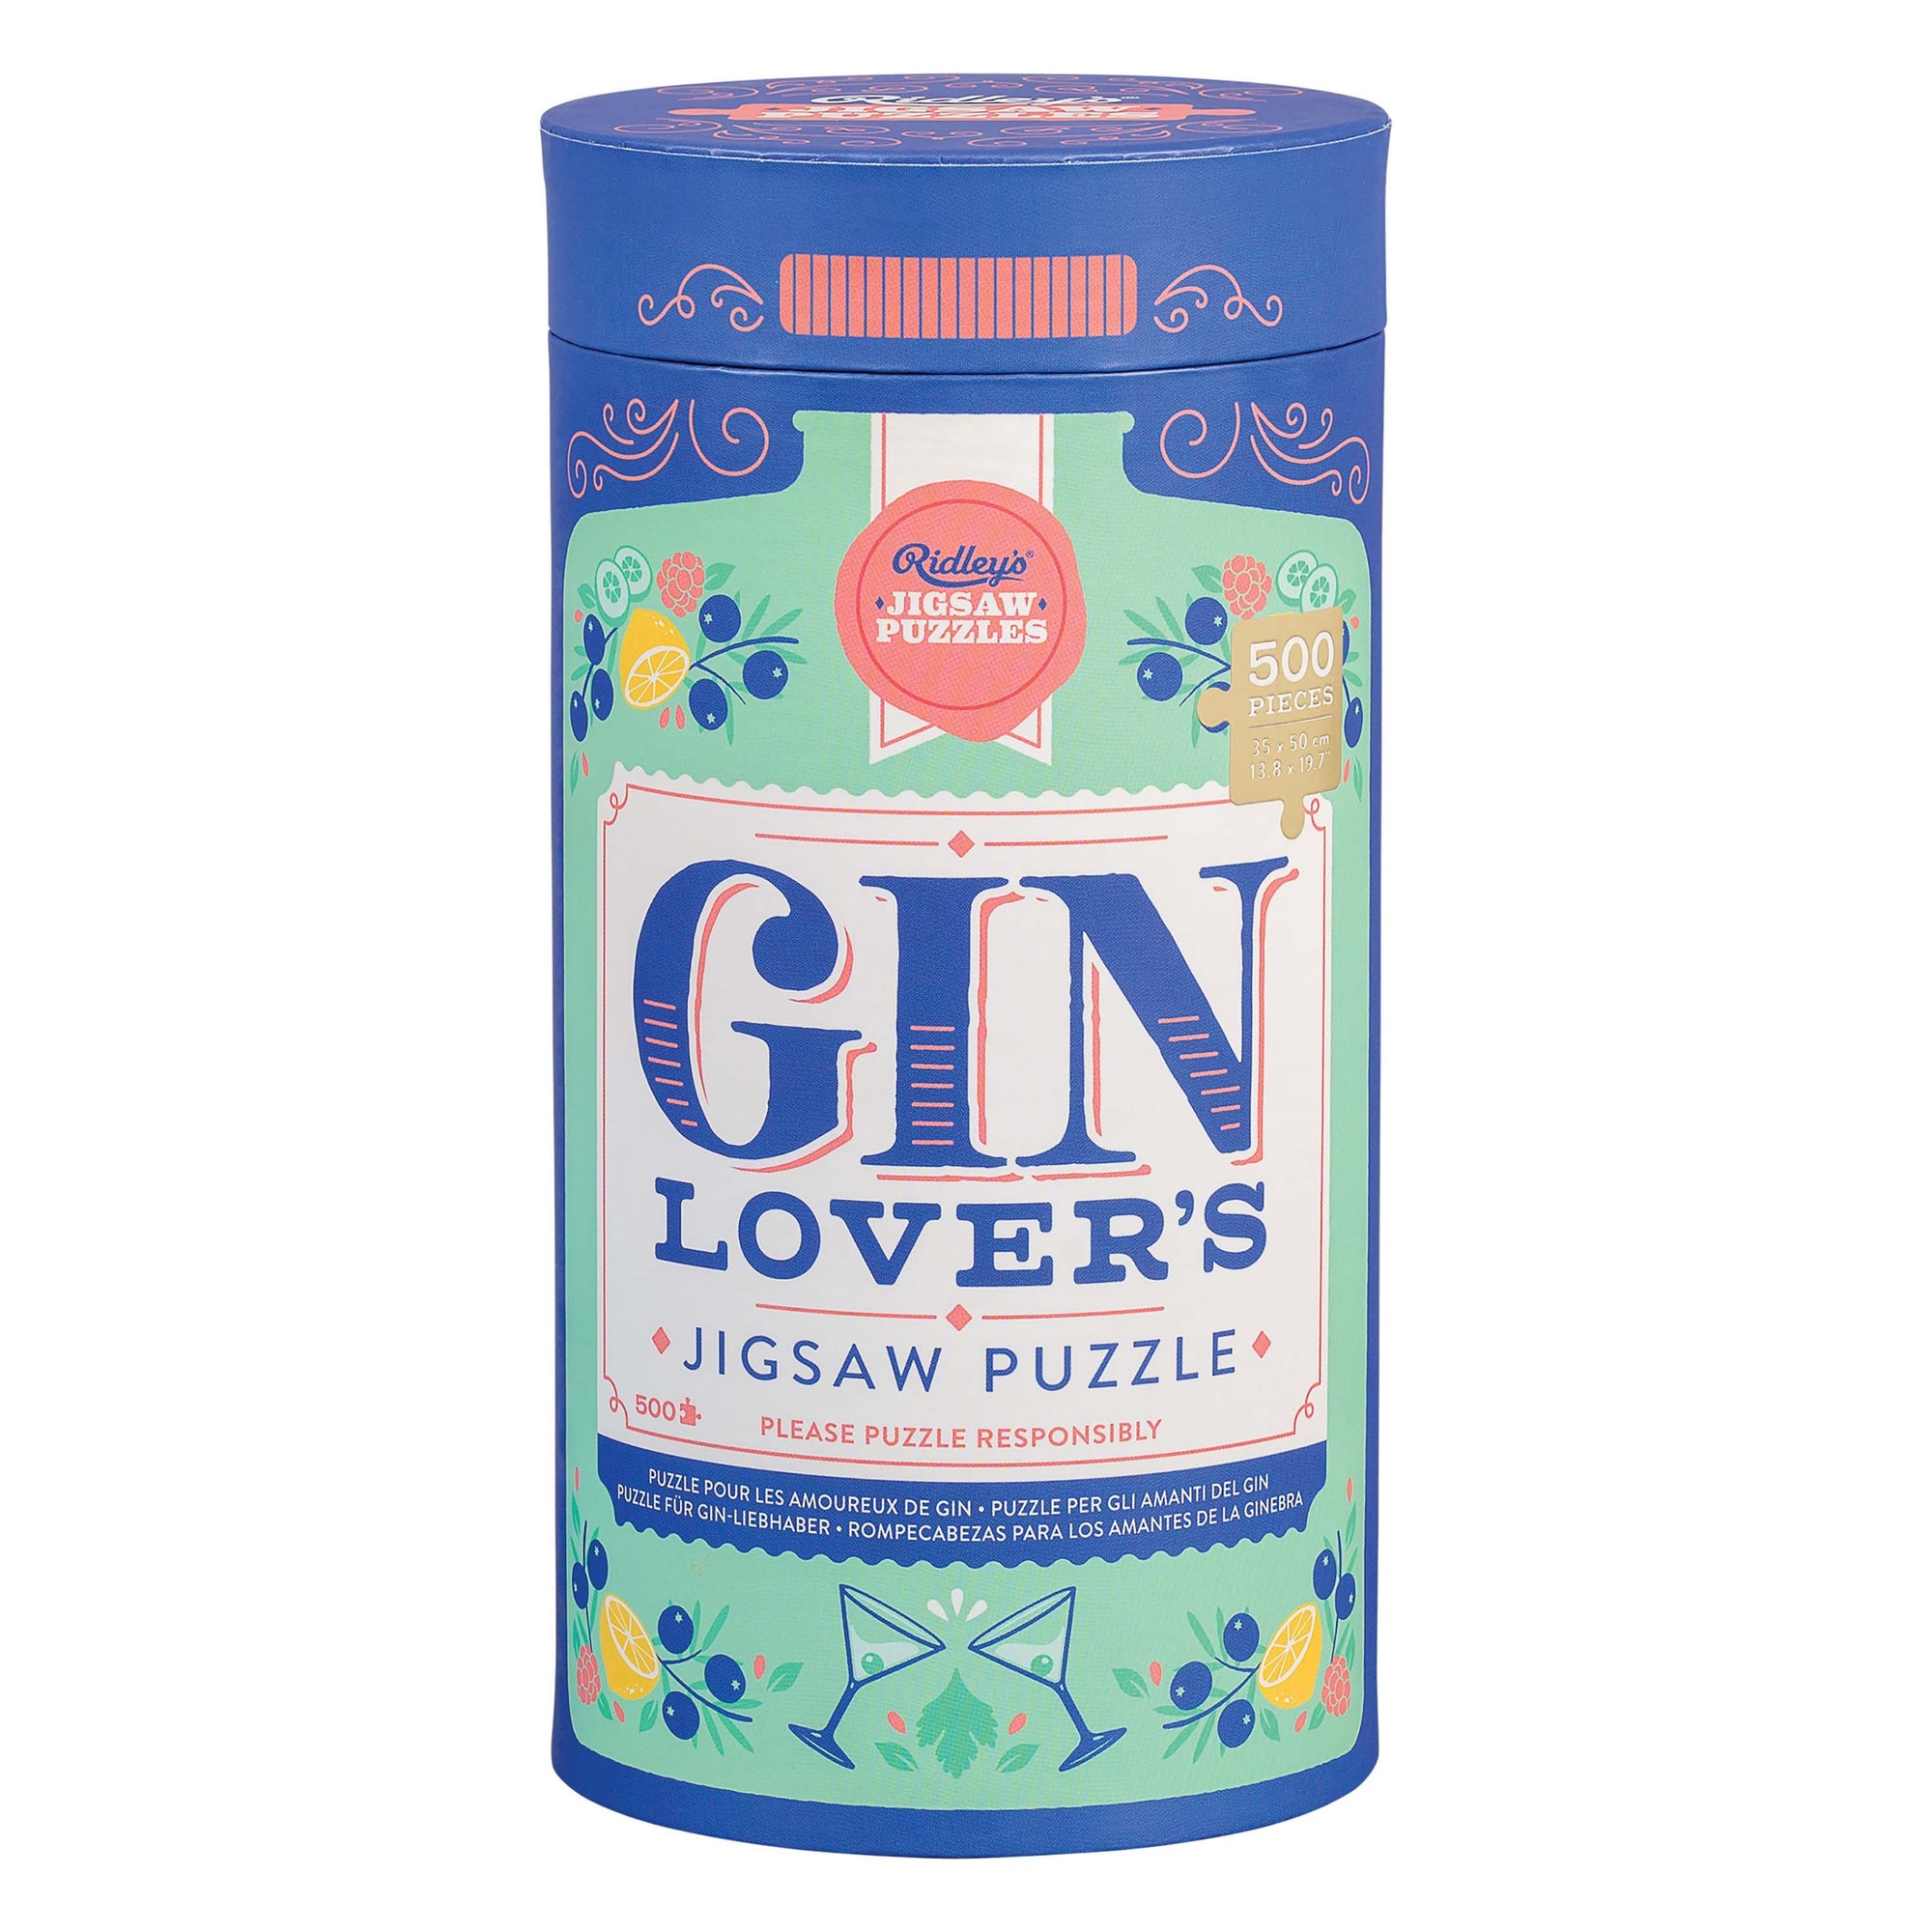 Gin Lover's 500 piece Jigsaw Puzzle